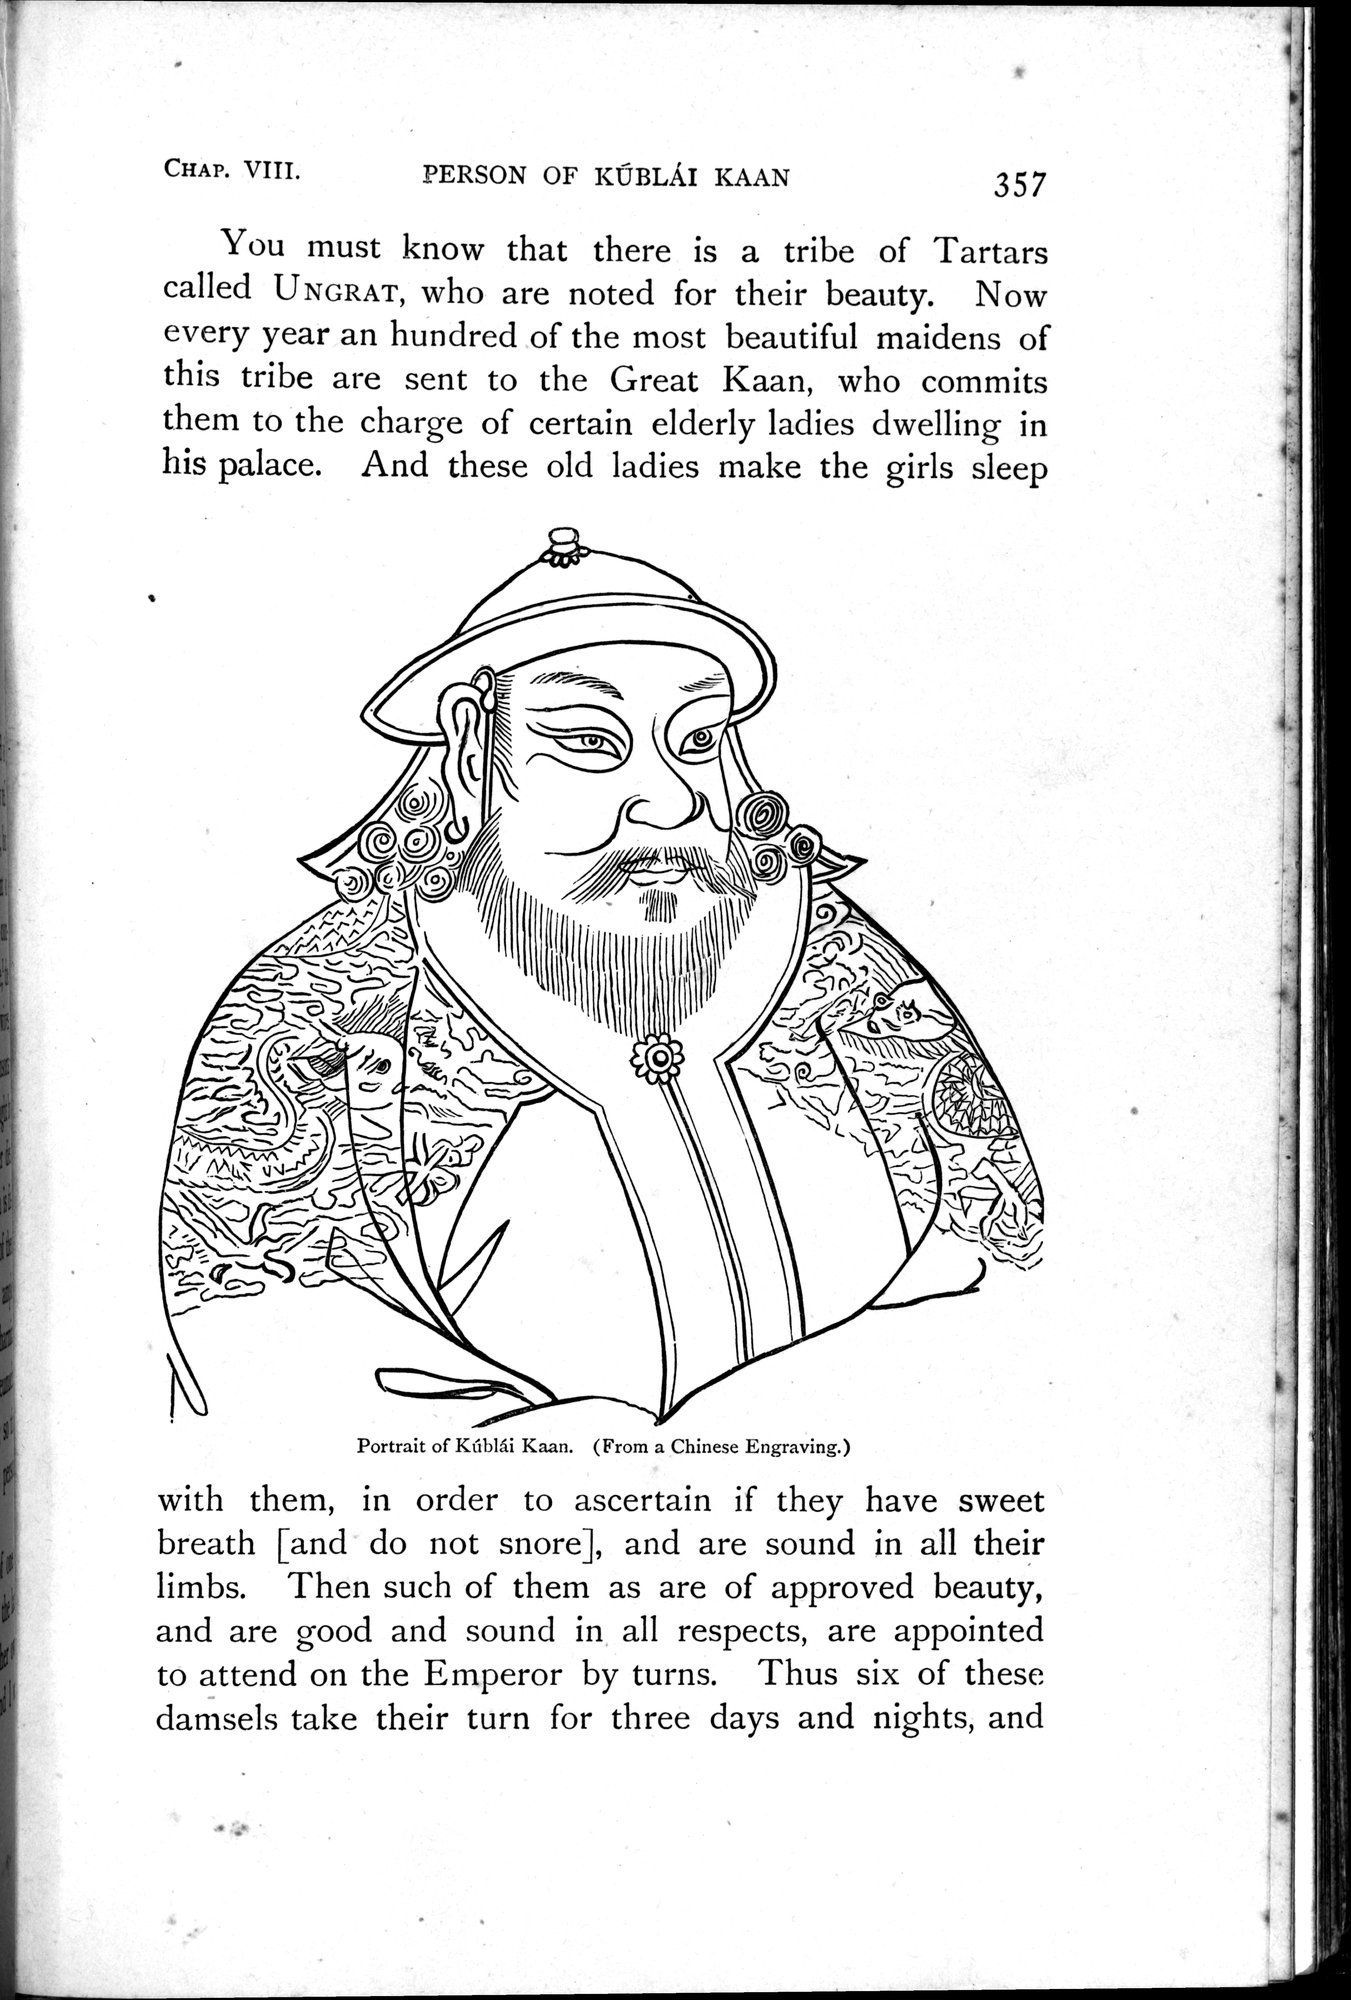 The Book of Ser Marco Polo : vol.1 / Page 667 (Grayscale High Resolution Image)